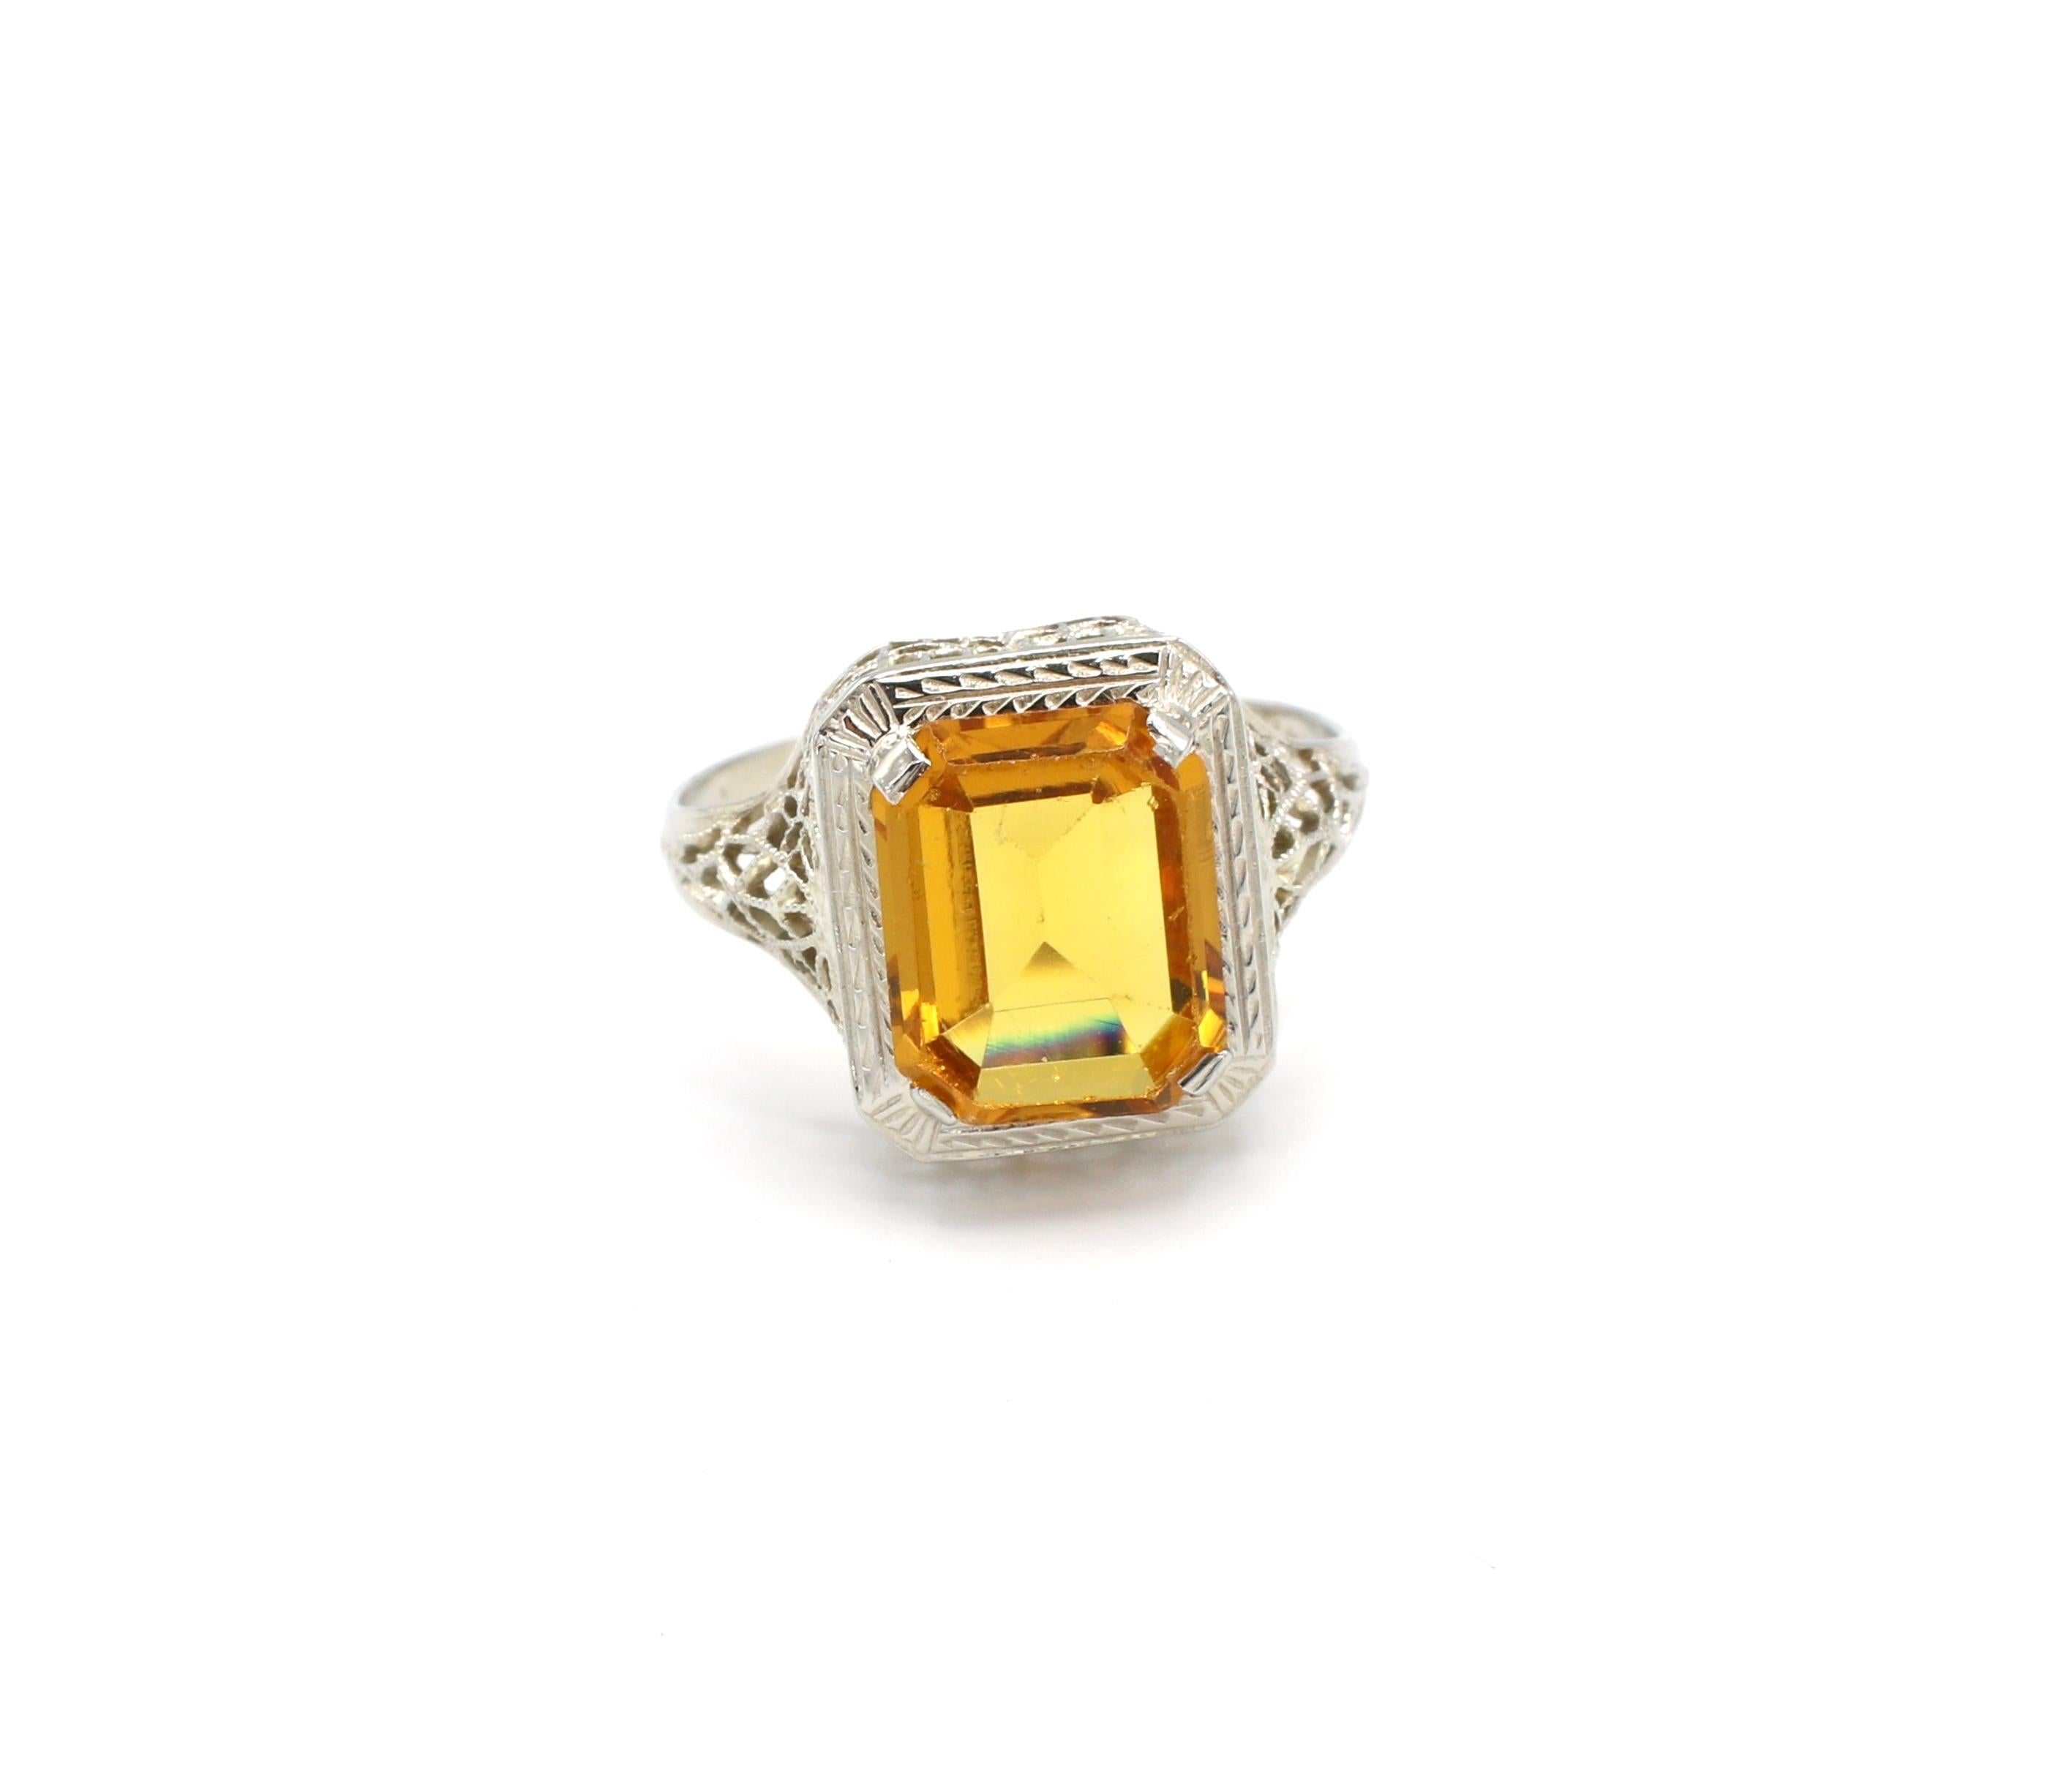 Vintage 14K White Gold Citrine Filigree Design Cocktail Ring Size 5.75

Metal: 14k white gold, marked 14k
Weight: 2.01 grams
Gemstone: 1 emerald cut citrine stone, 10.1mm x 8mm x 4.1mm, slight surface scratches
Band is 1.4mm at base
Size: 5.75 (US)